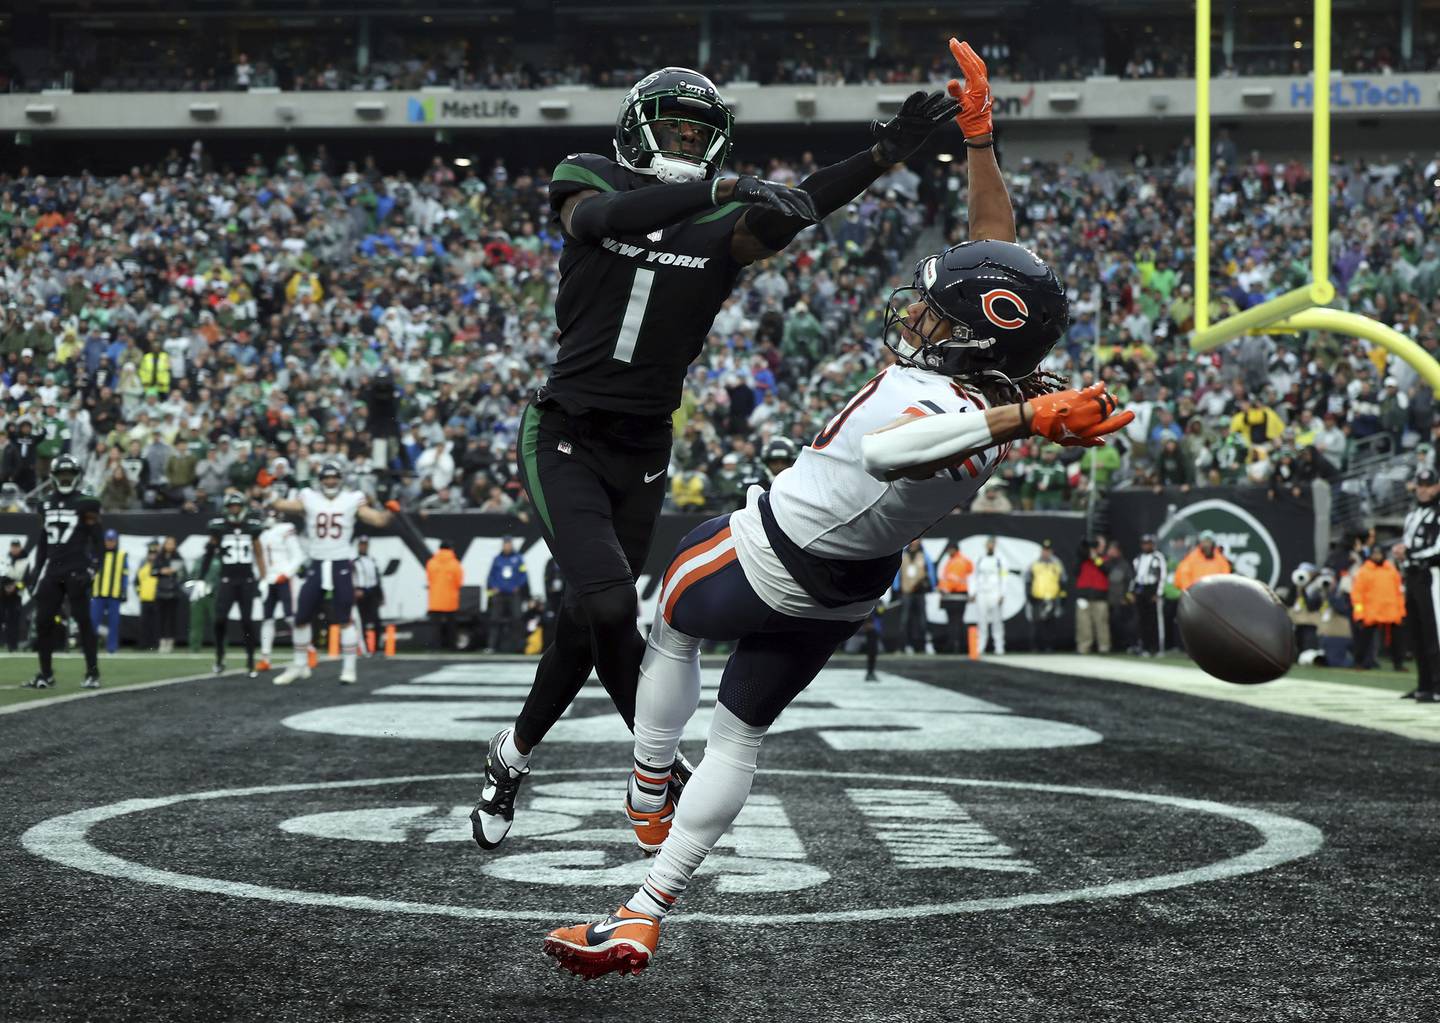 Bears wide receiver Chase Claypool (10) can’t make a catch in the end zone under pressure from Jets cornerback Sauce Gardner (1) on Nov. 27, 2022, in East Rutherford, N.J.